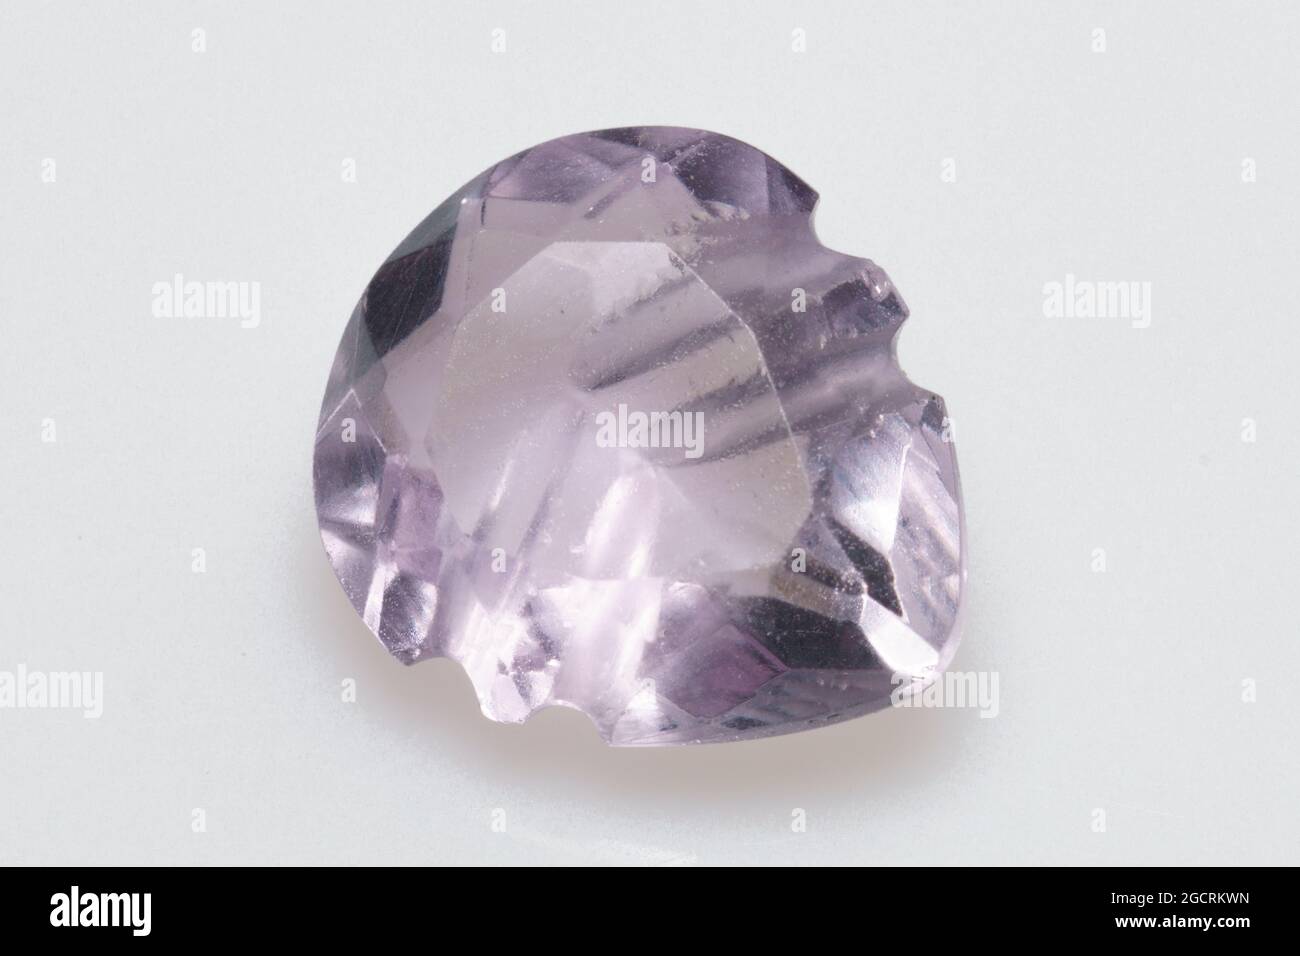 Natural stone amethyst on background Stock Photo